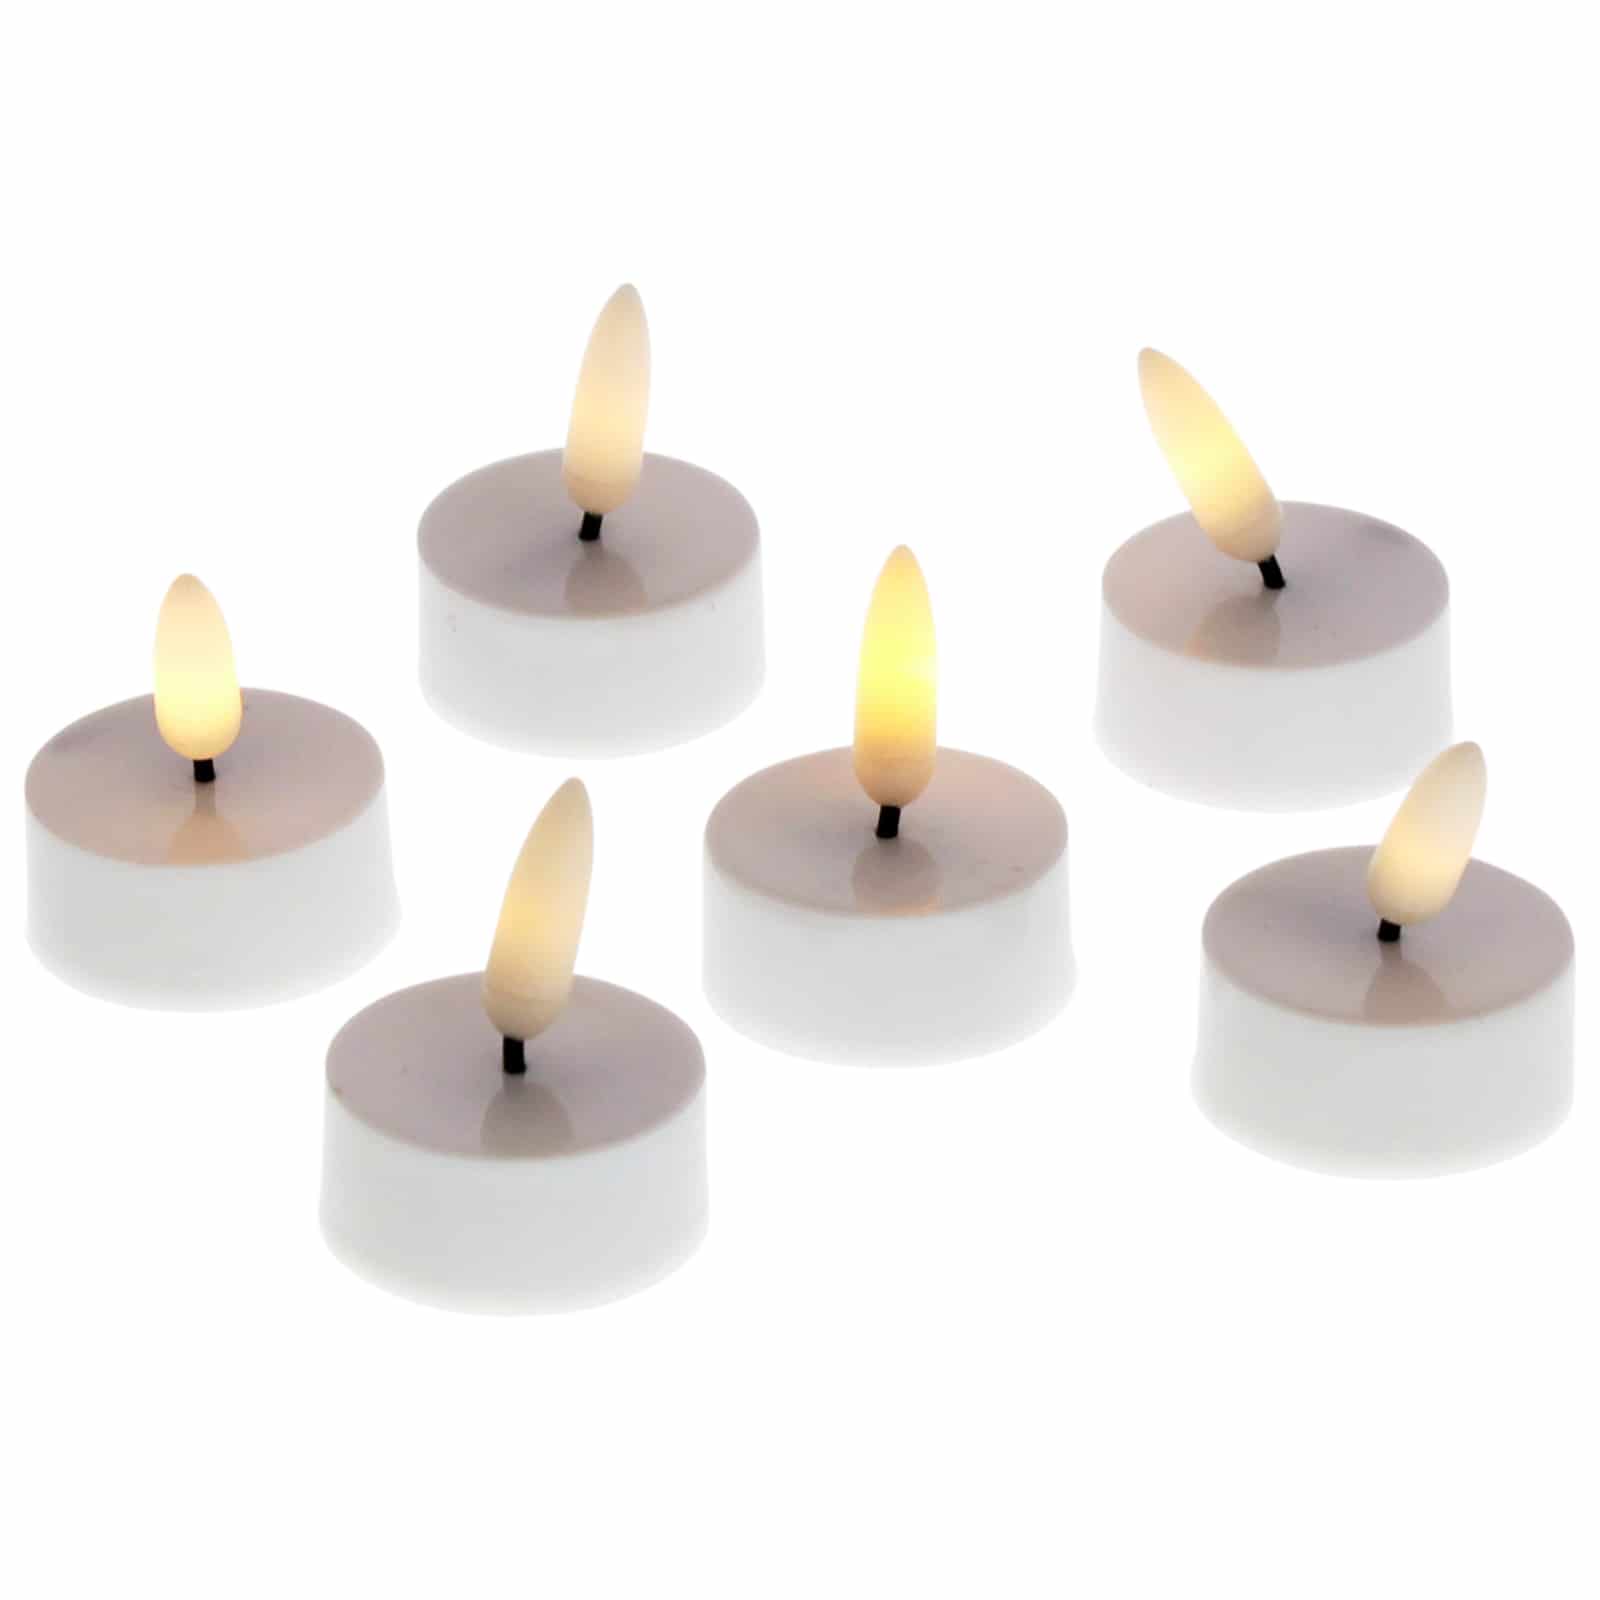 Quirky & unusual LED | online WERNS candles